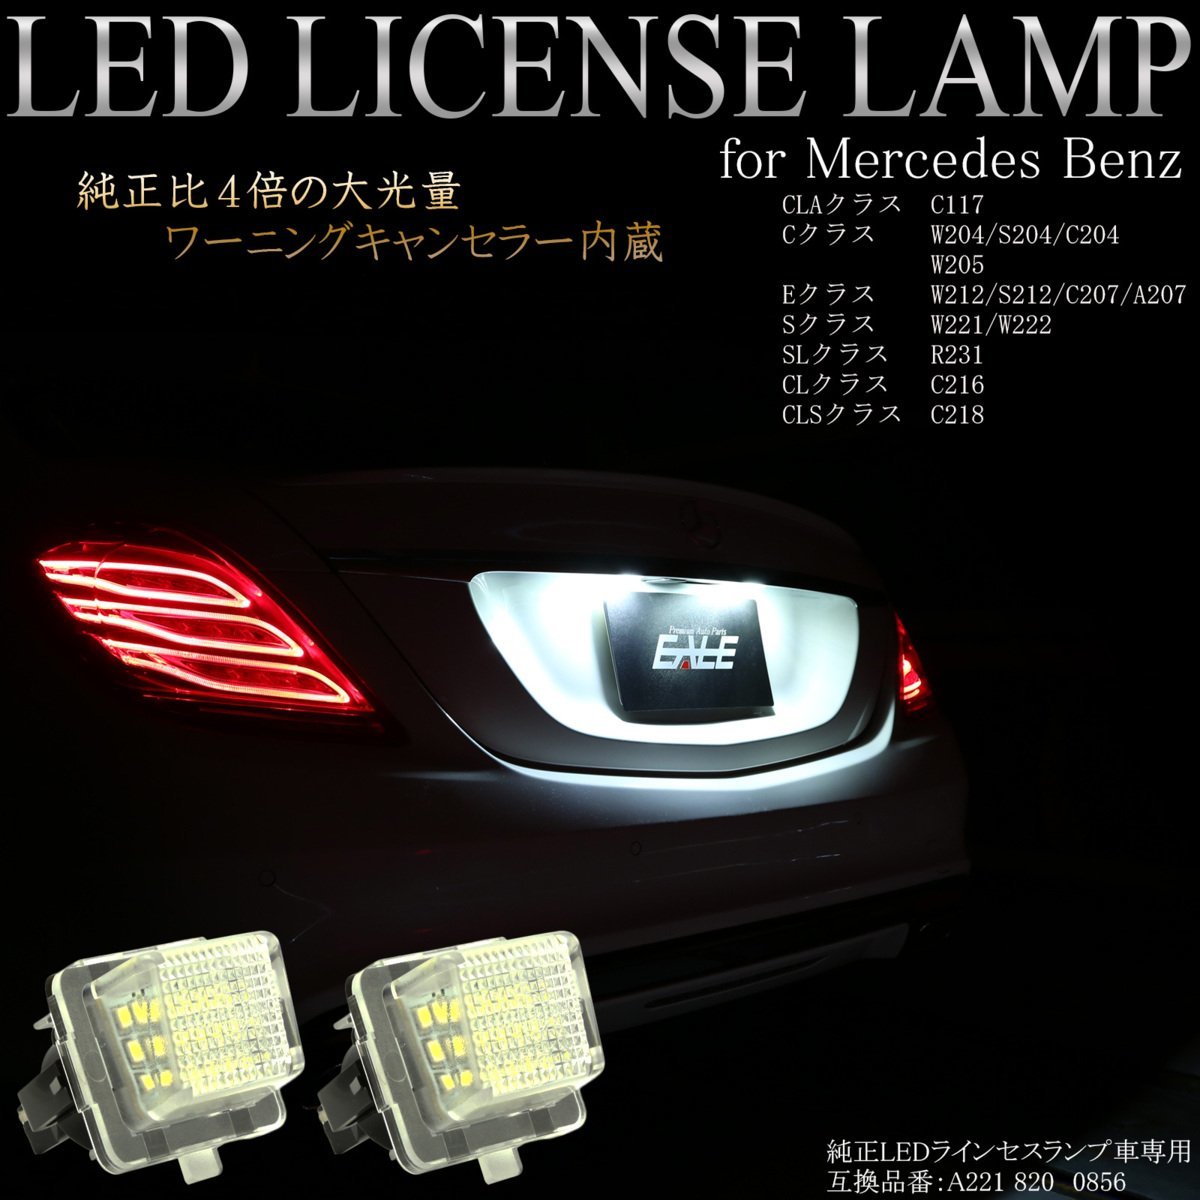 LED license lamp Benz for CLA Class C117 / C Class sedan W204 W205 Wagon S204 coupe C204 / SL Class R231 number light R-106